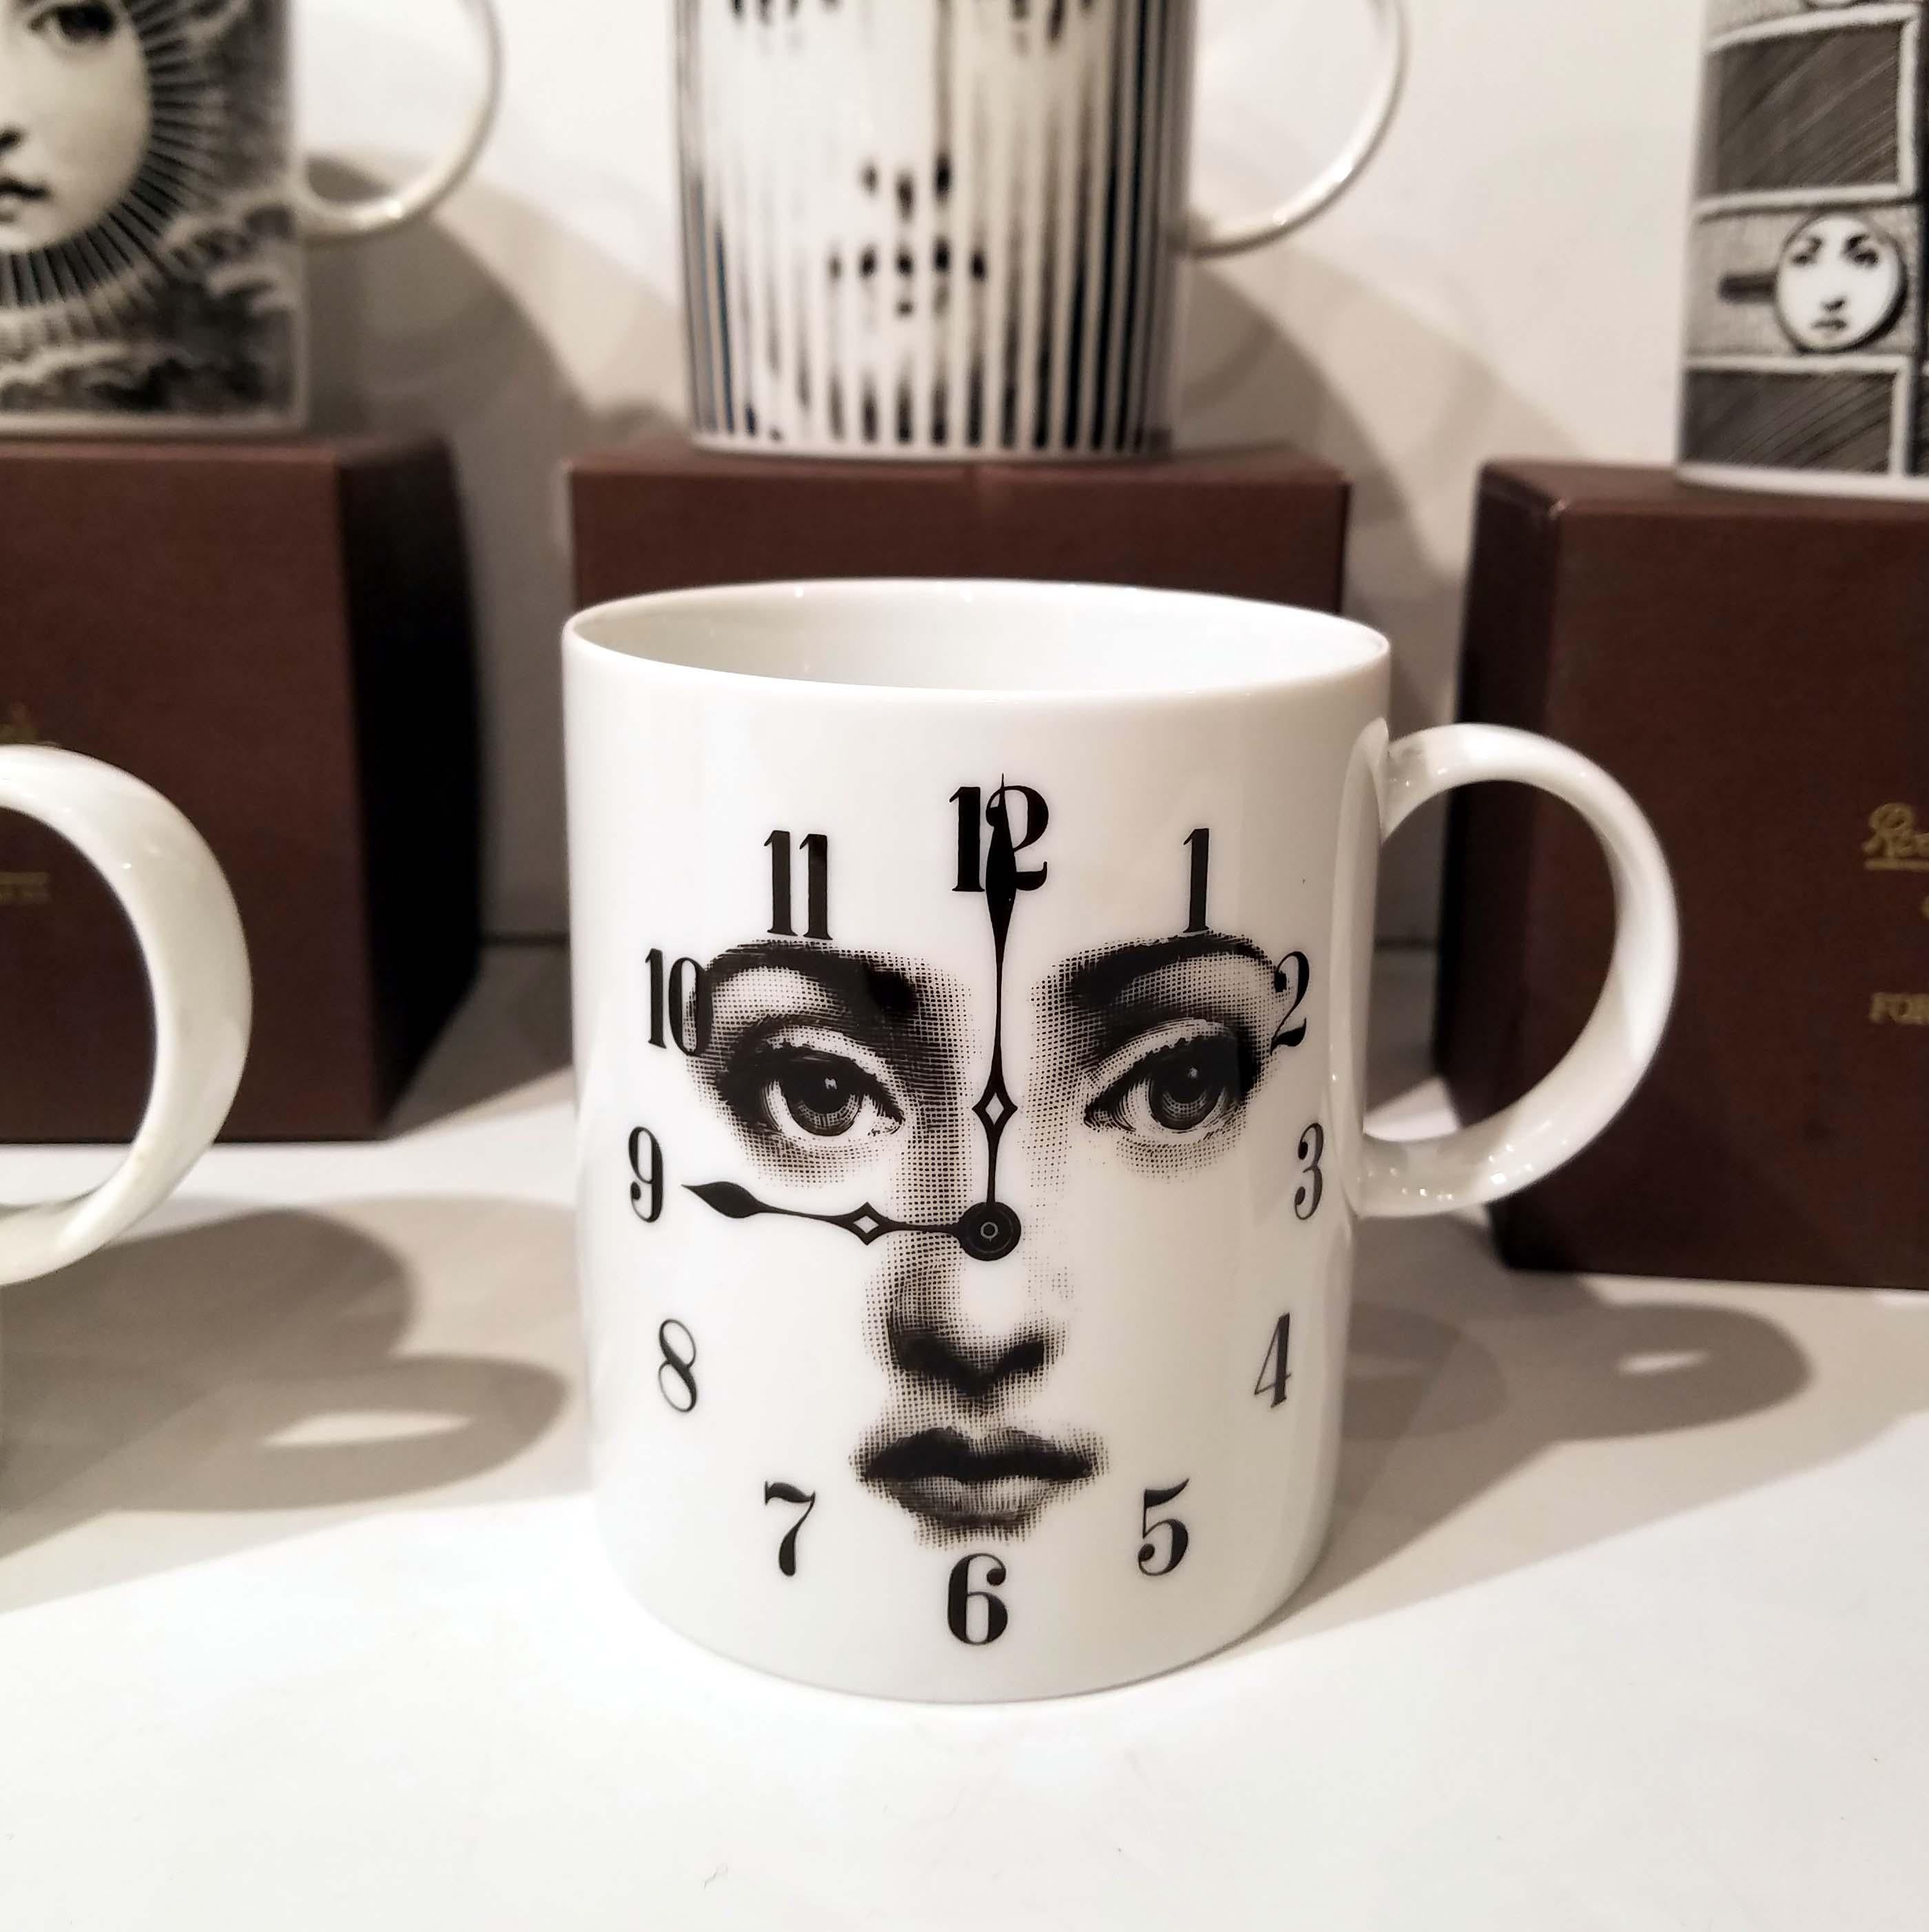 This set of 6 Piero Fornasetti serigraphed transfer porcelain coffee or tea mugs for Rosenthal Classic Germany are from the 1980s. They come in their original boxes. They are from the Julia Collection of Lina Cavalieri. It is hallmarked on the